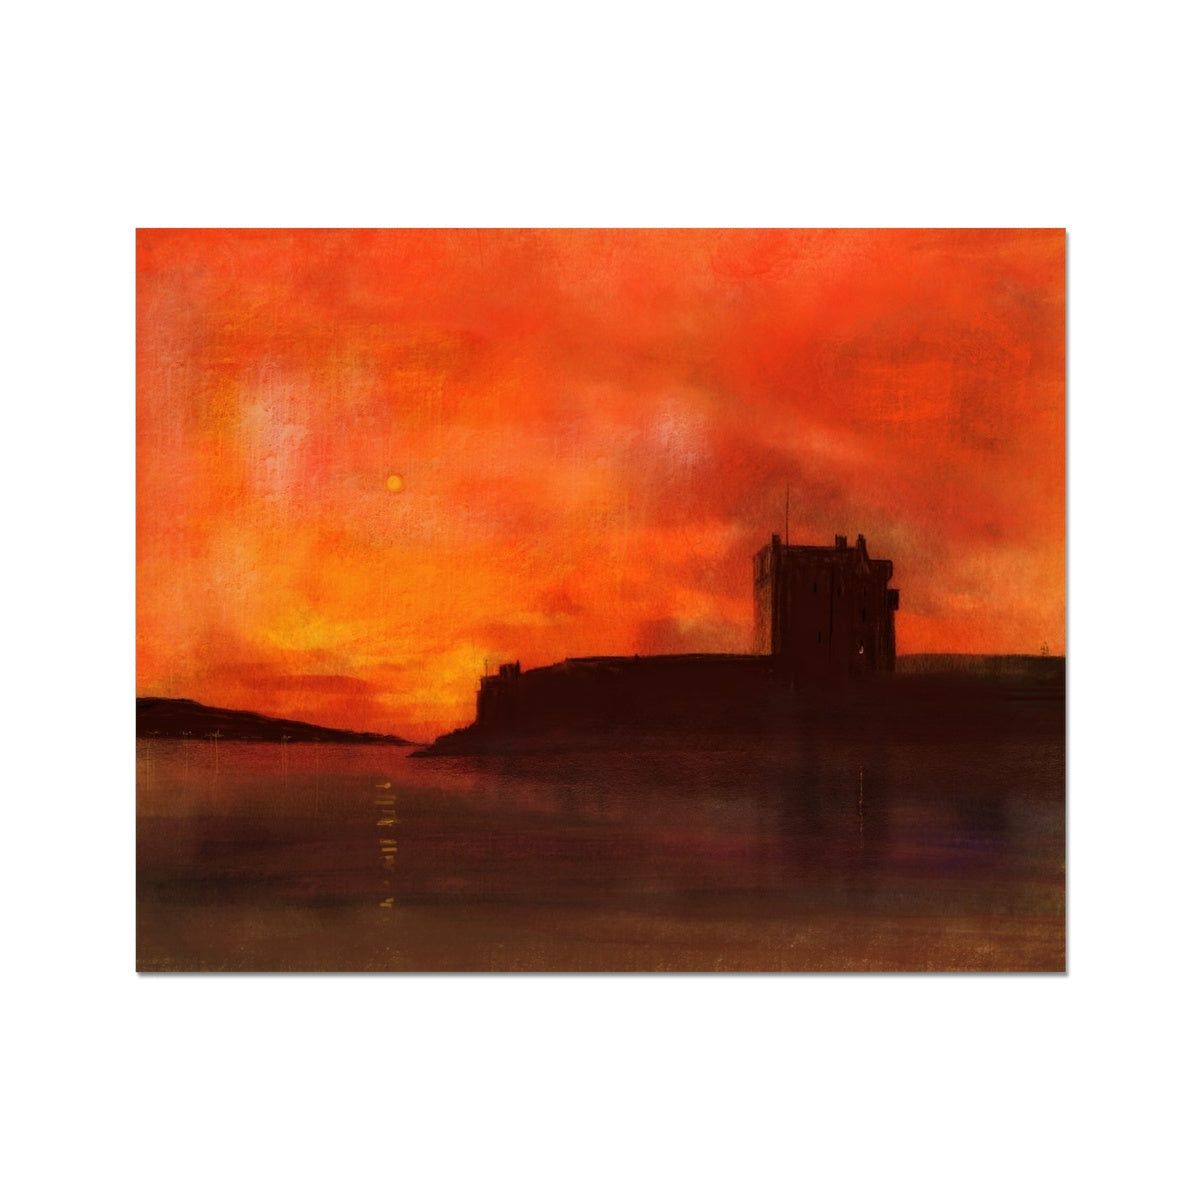 Broughty Castle Sunset Painting | Artist Proof Collector Prints From Scotland-Artist Proof Collector Prints-Scottish Castles Art Gallery-20"x16"-Paintings, Prints, Homeware, Art Gifts From Scotland By Scottish Artist Kevin Hunter